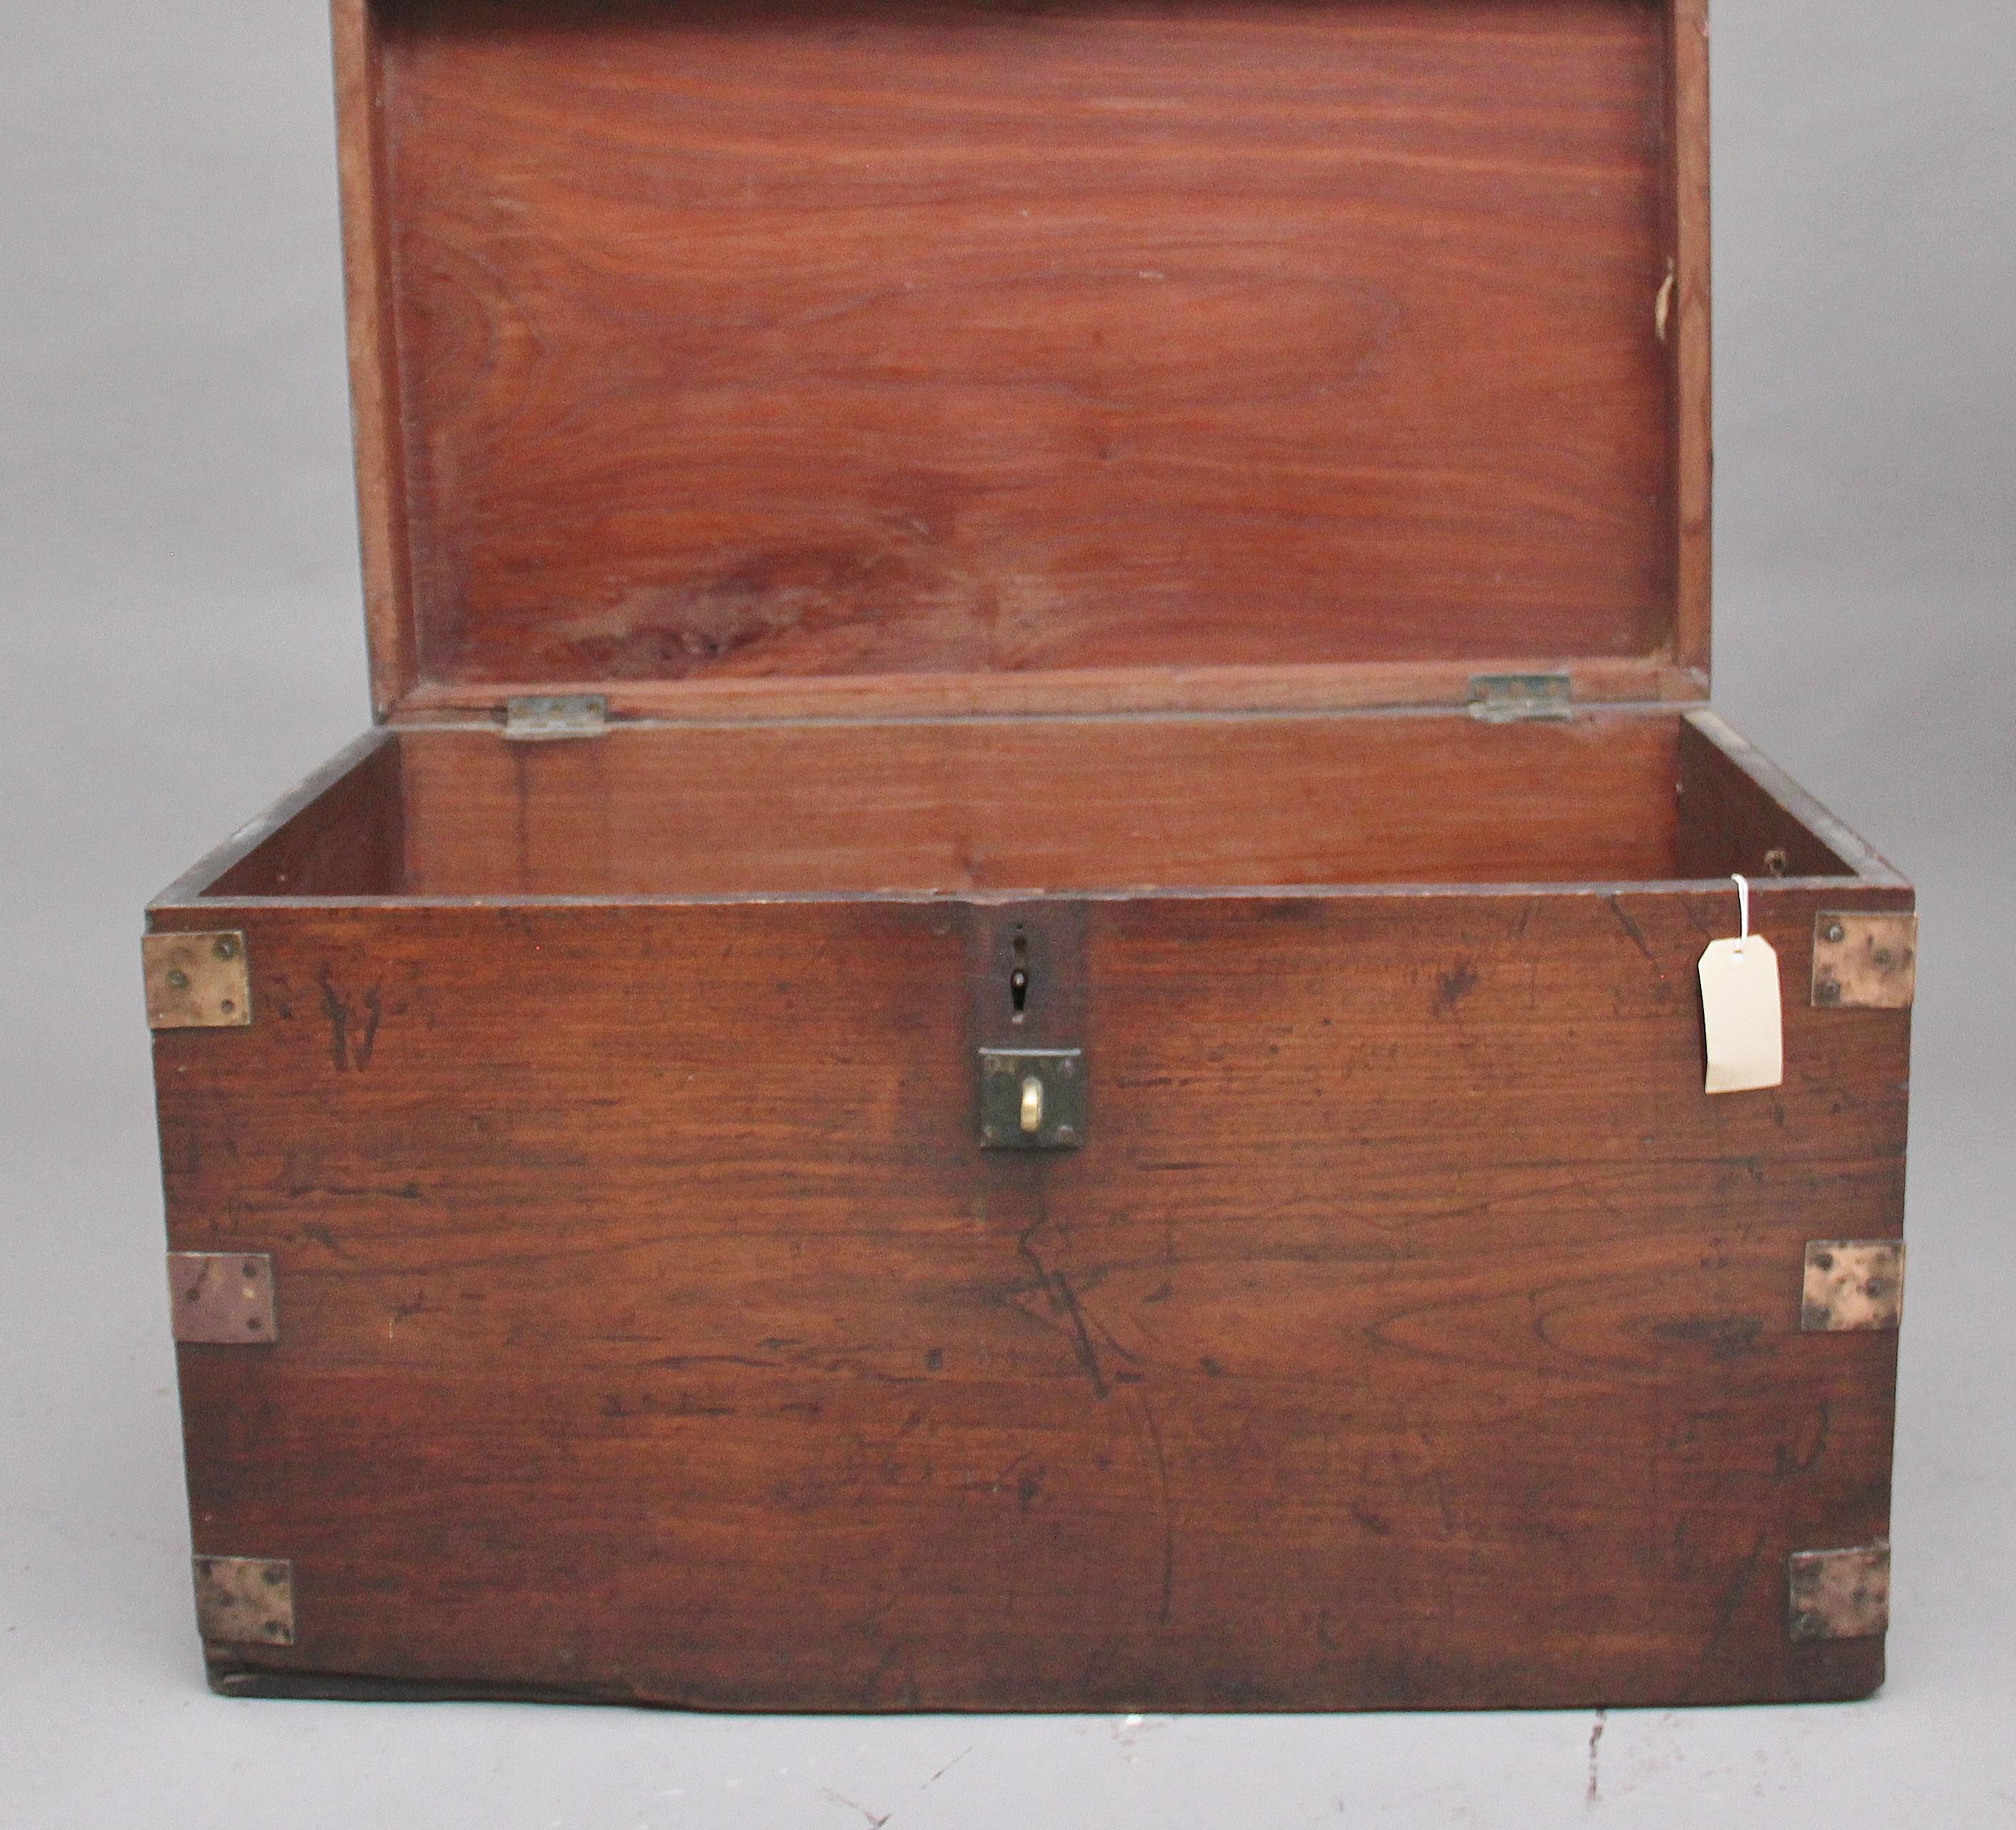 Early Victorian 19th Century Teak and Brass Bound Military Trunk